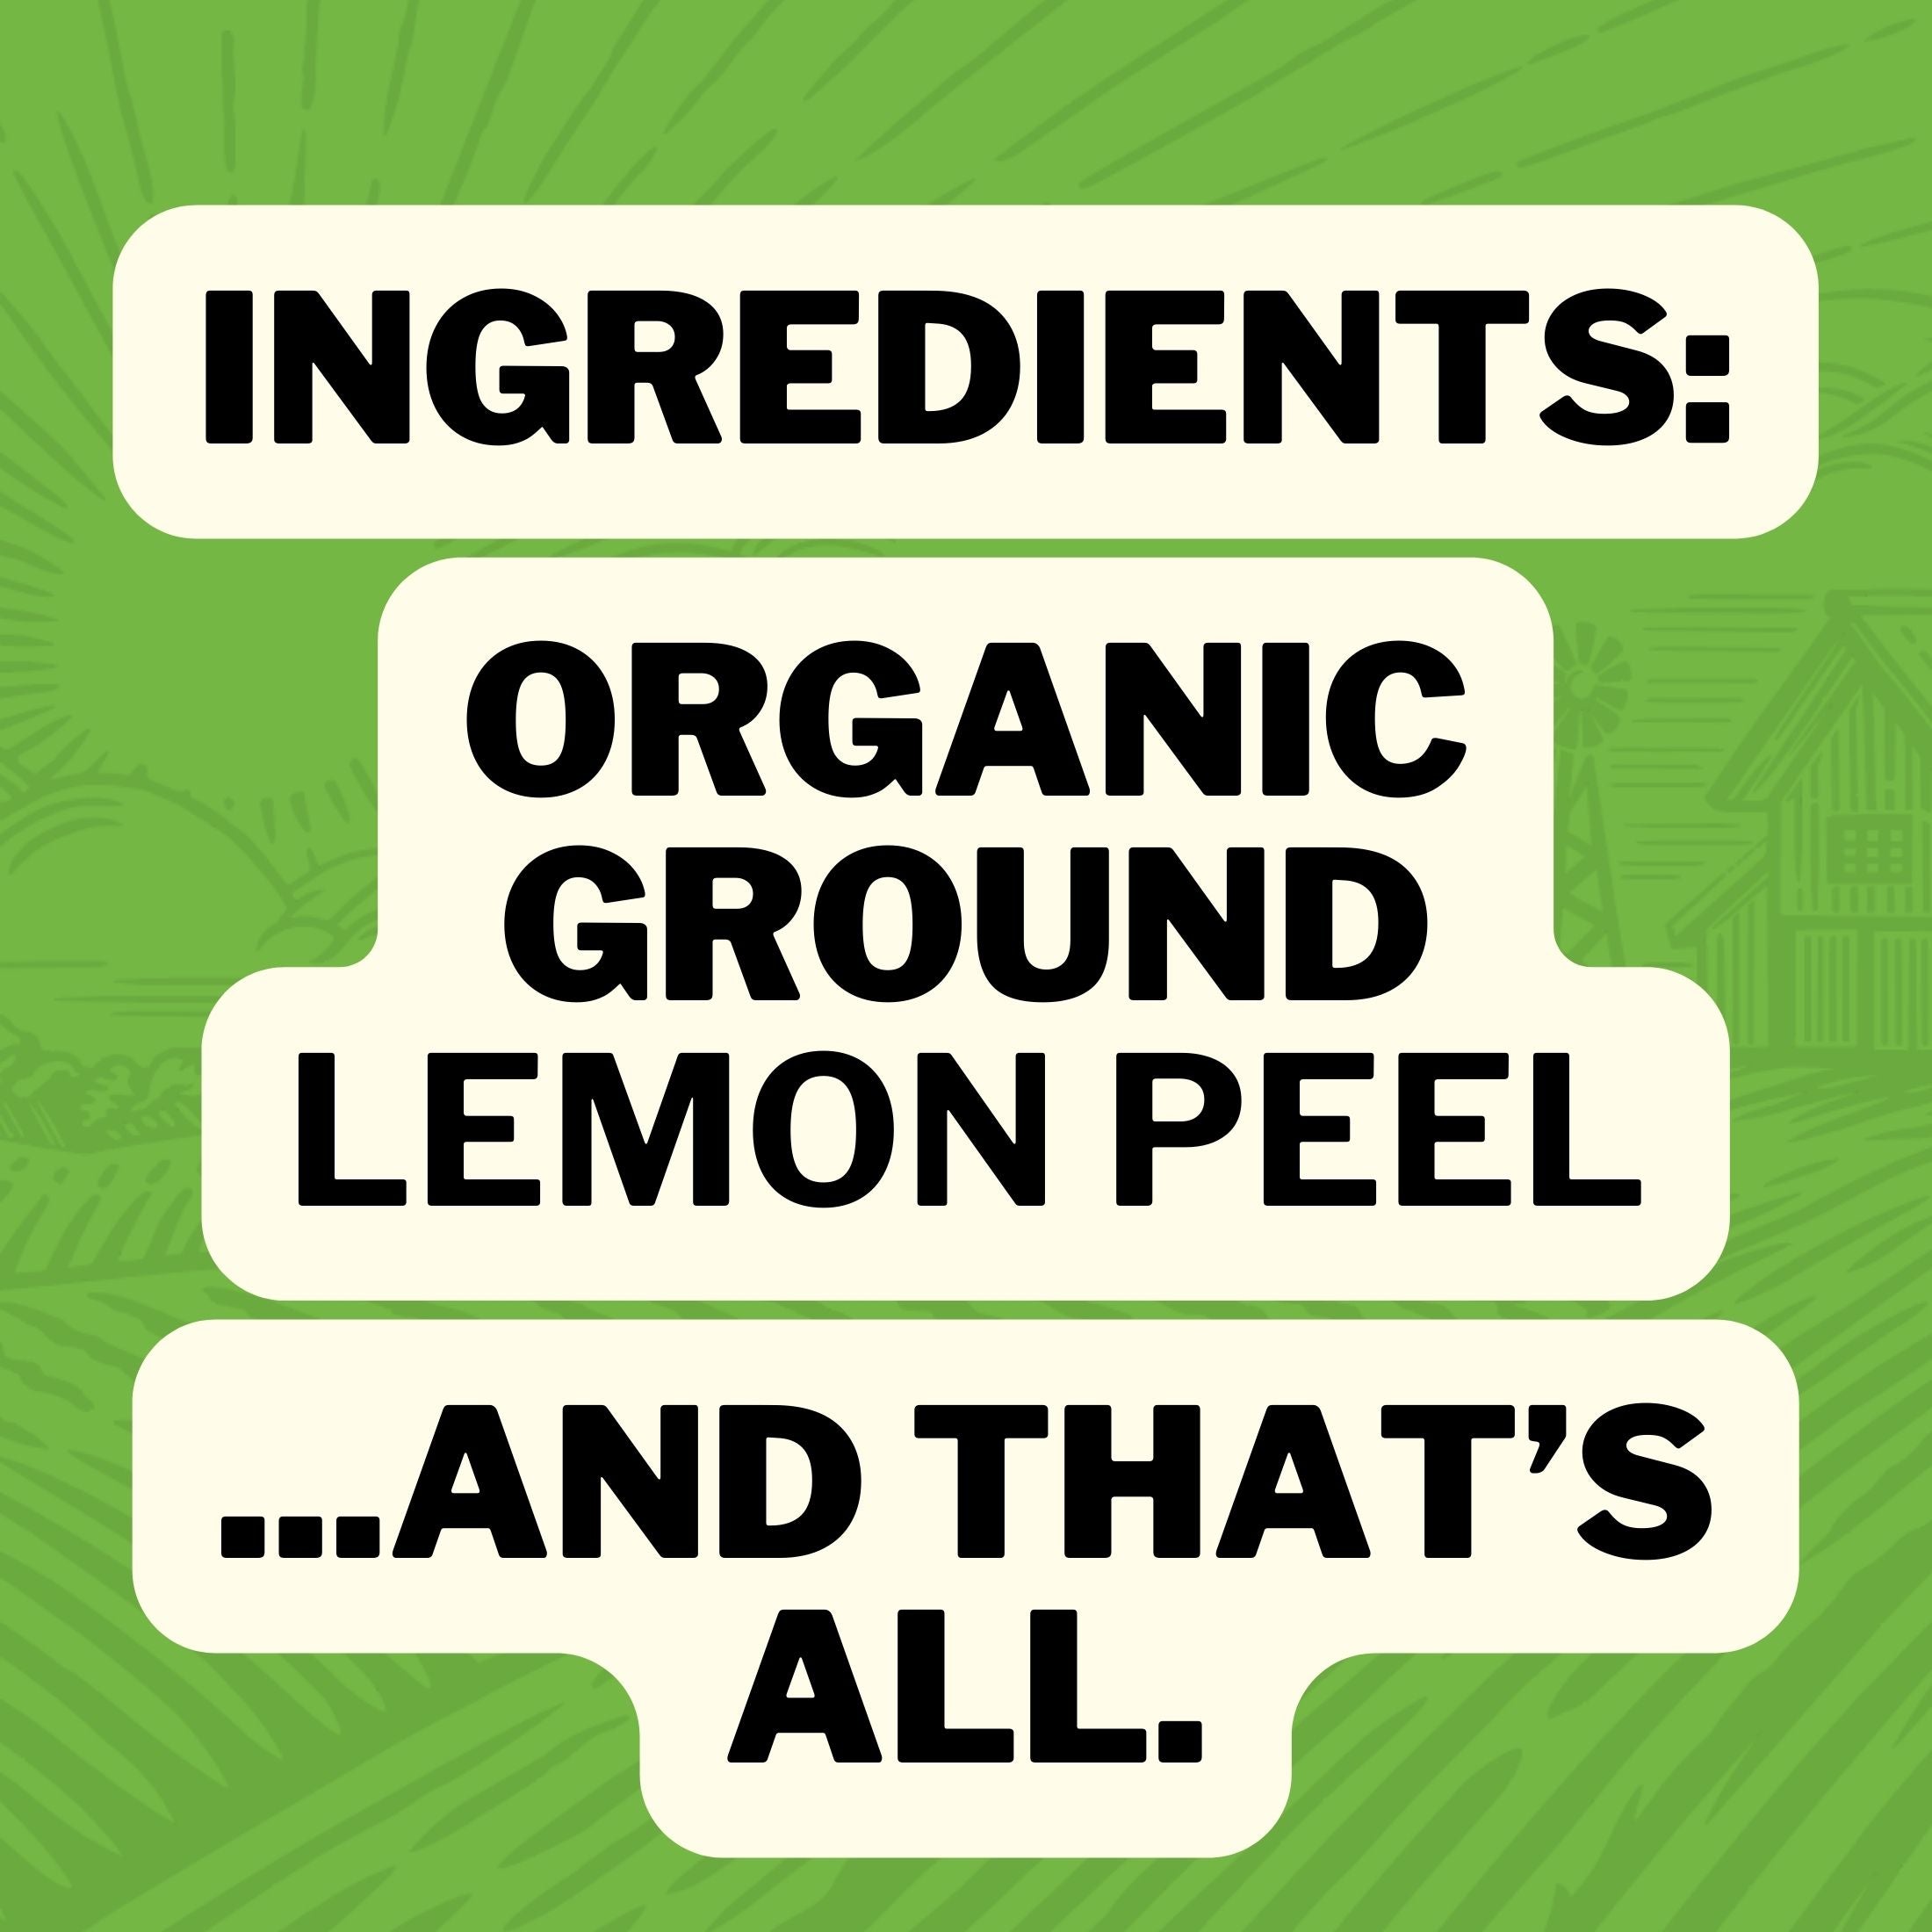 Ingredients: Organic Ground Lemon Peel... and that's all.